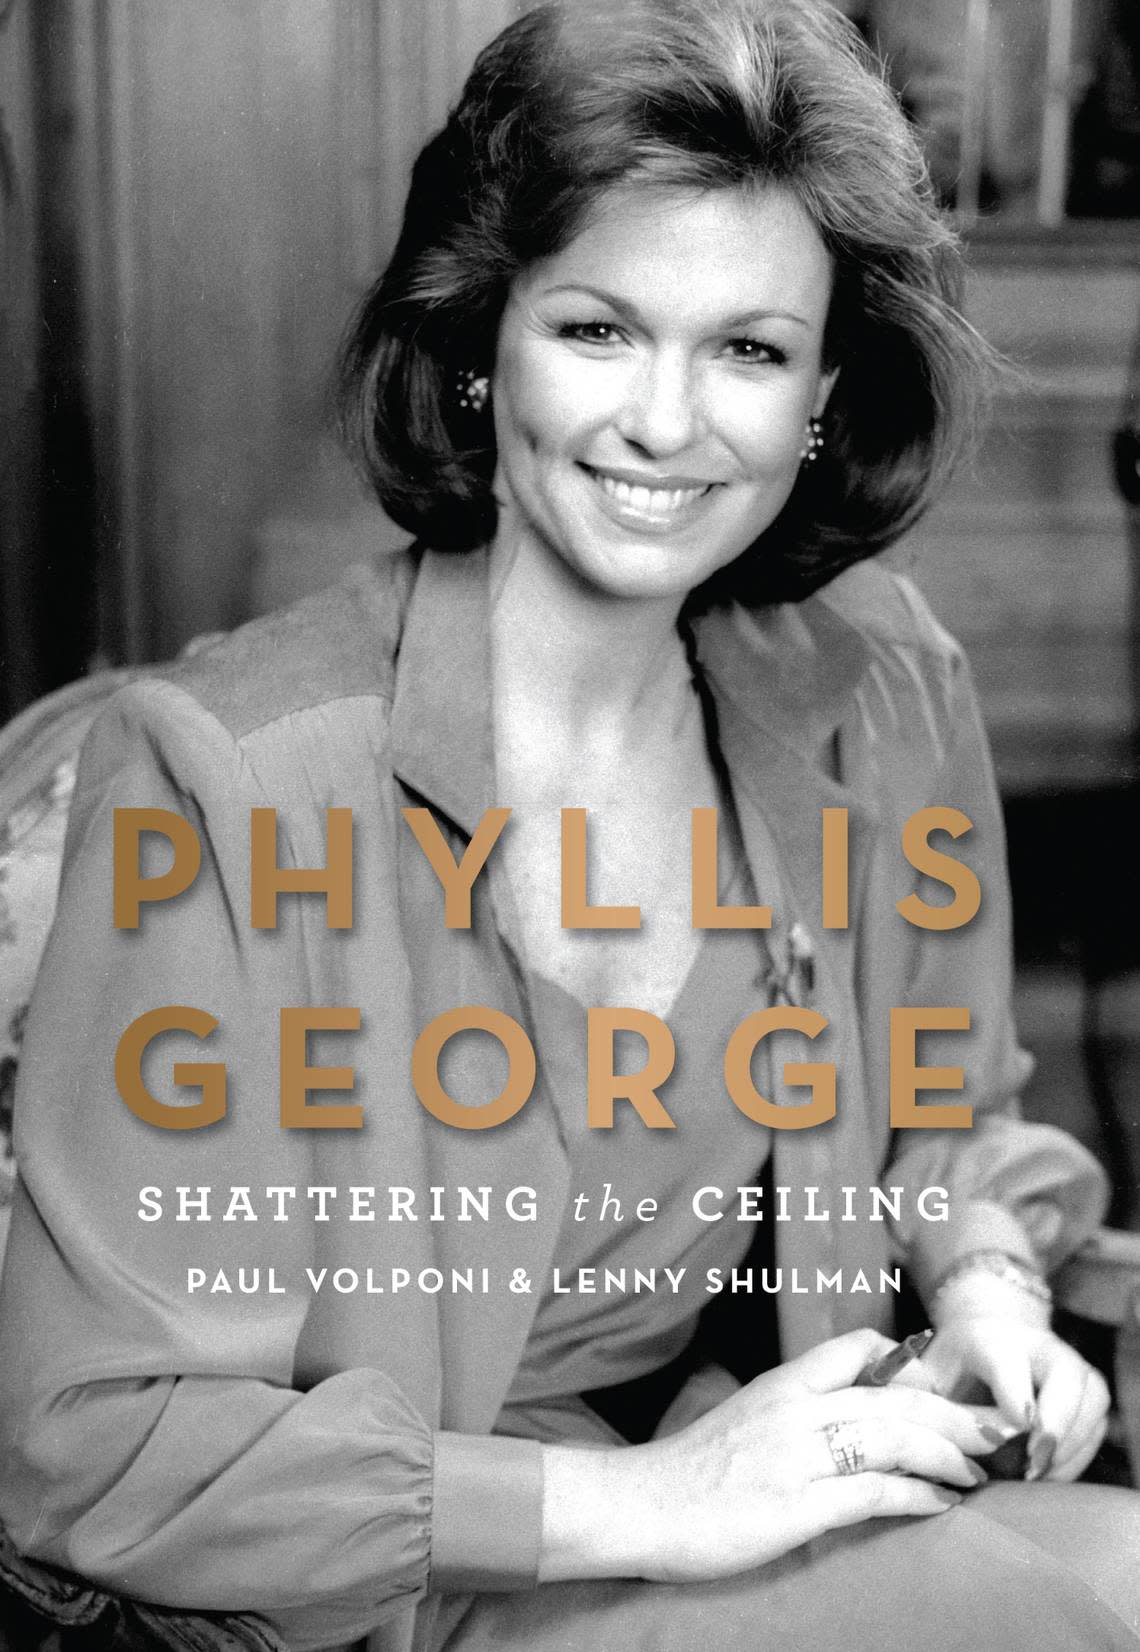 Phyllis George faced push back when she was hired by CBS in 1975 to work as a co-host on “The NFL Today.”